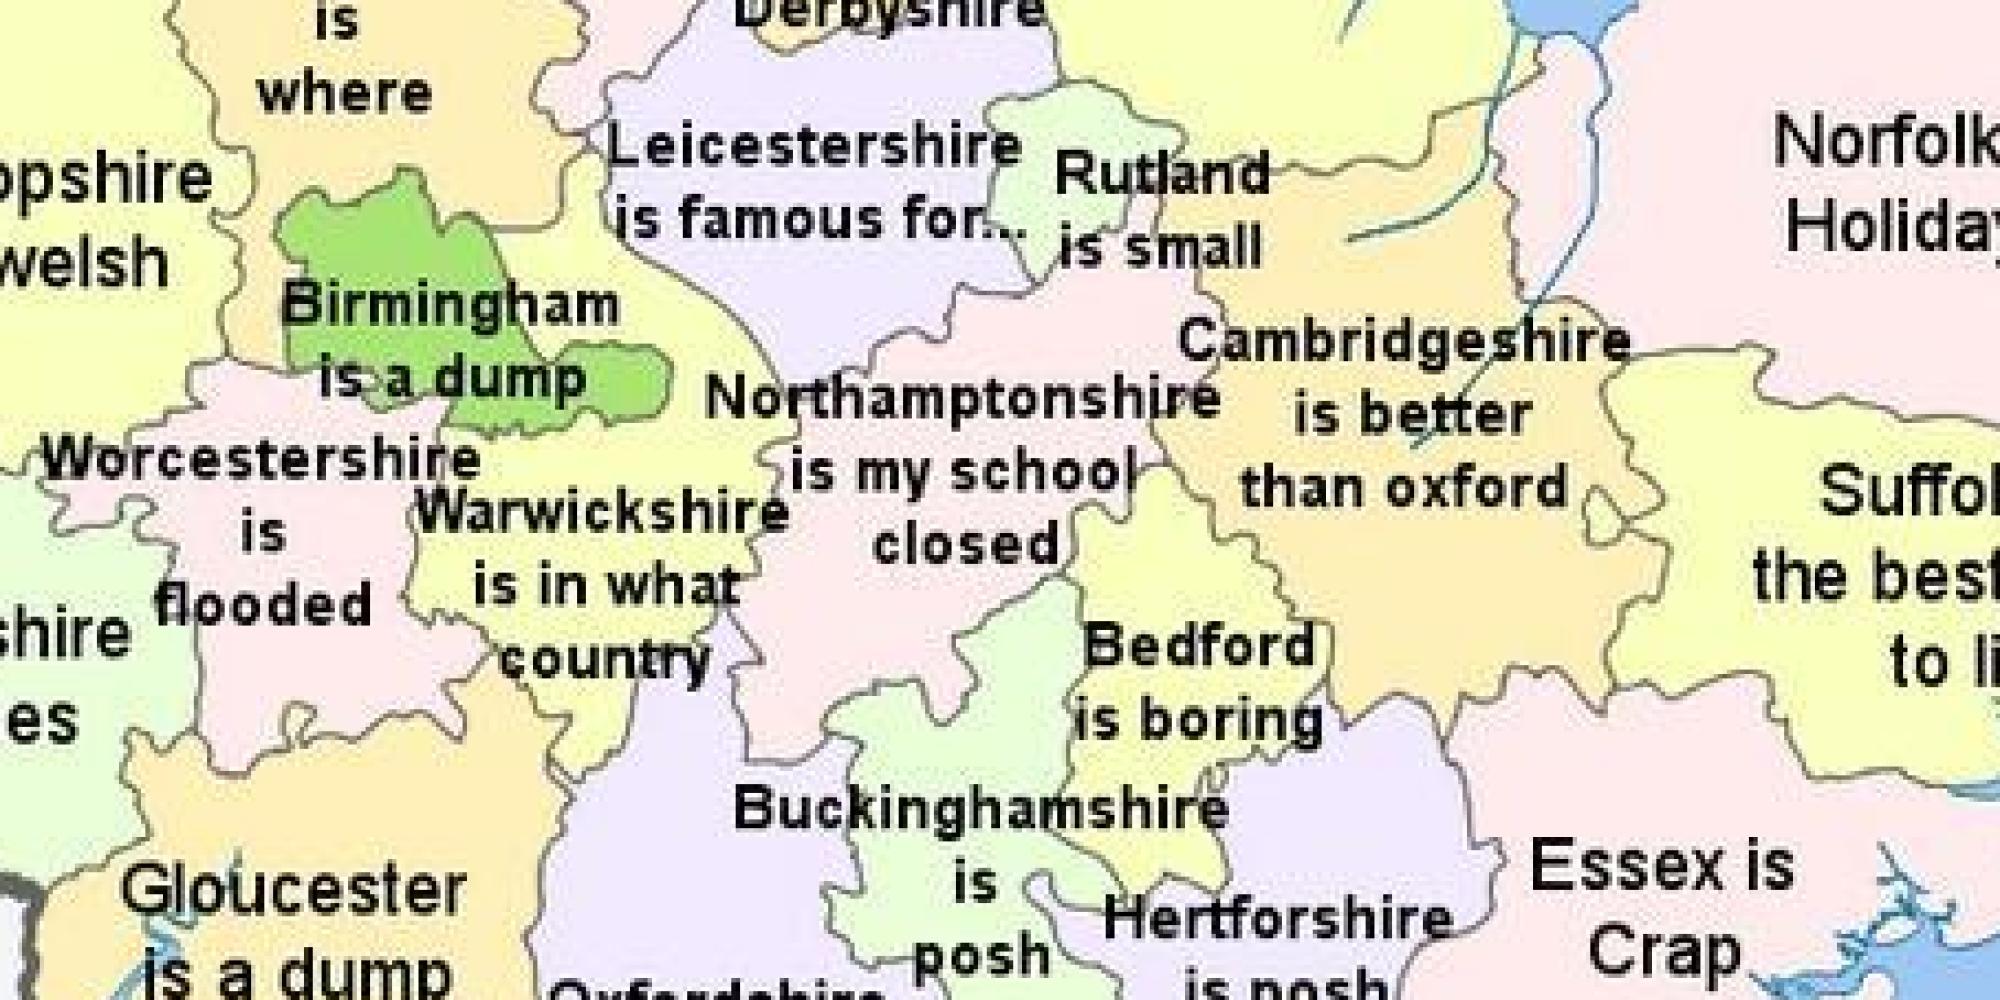 the-greatest-map-of-english-counties-you-will-ever-see-huffpost-uk